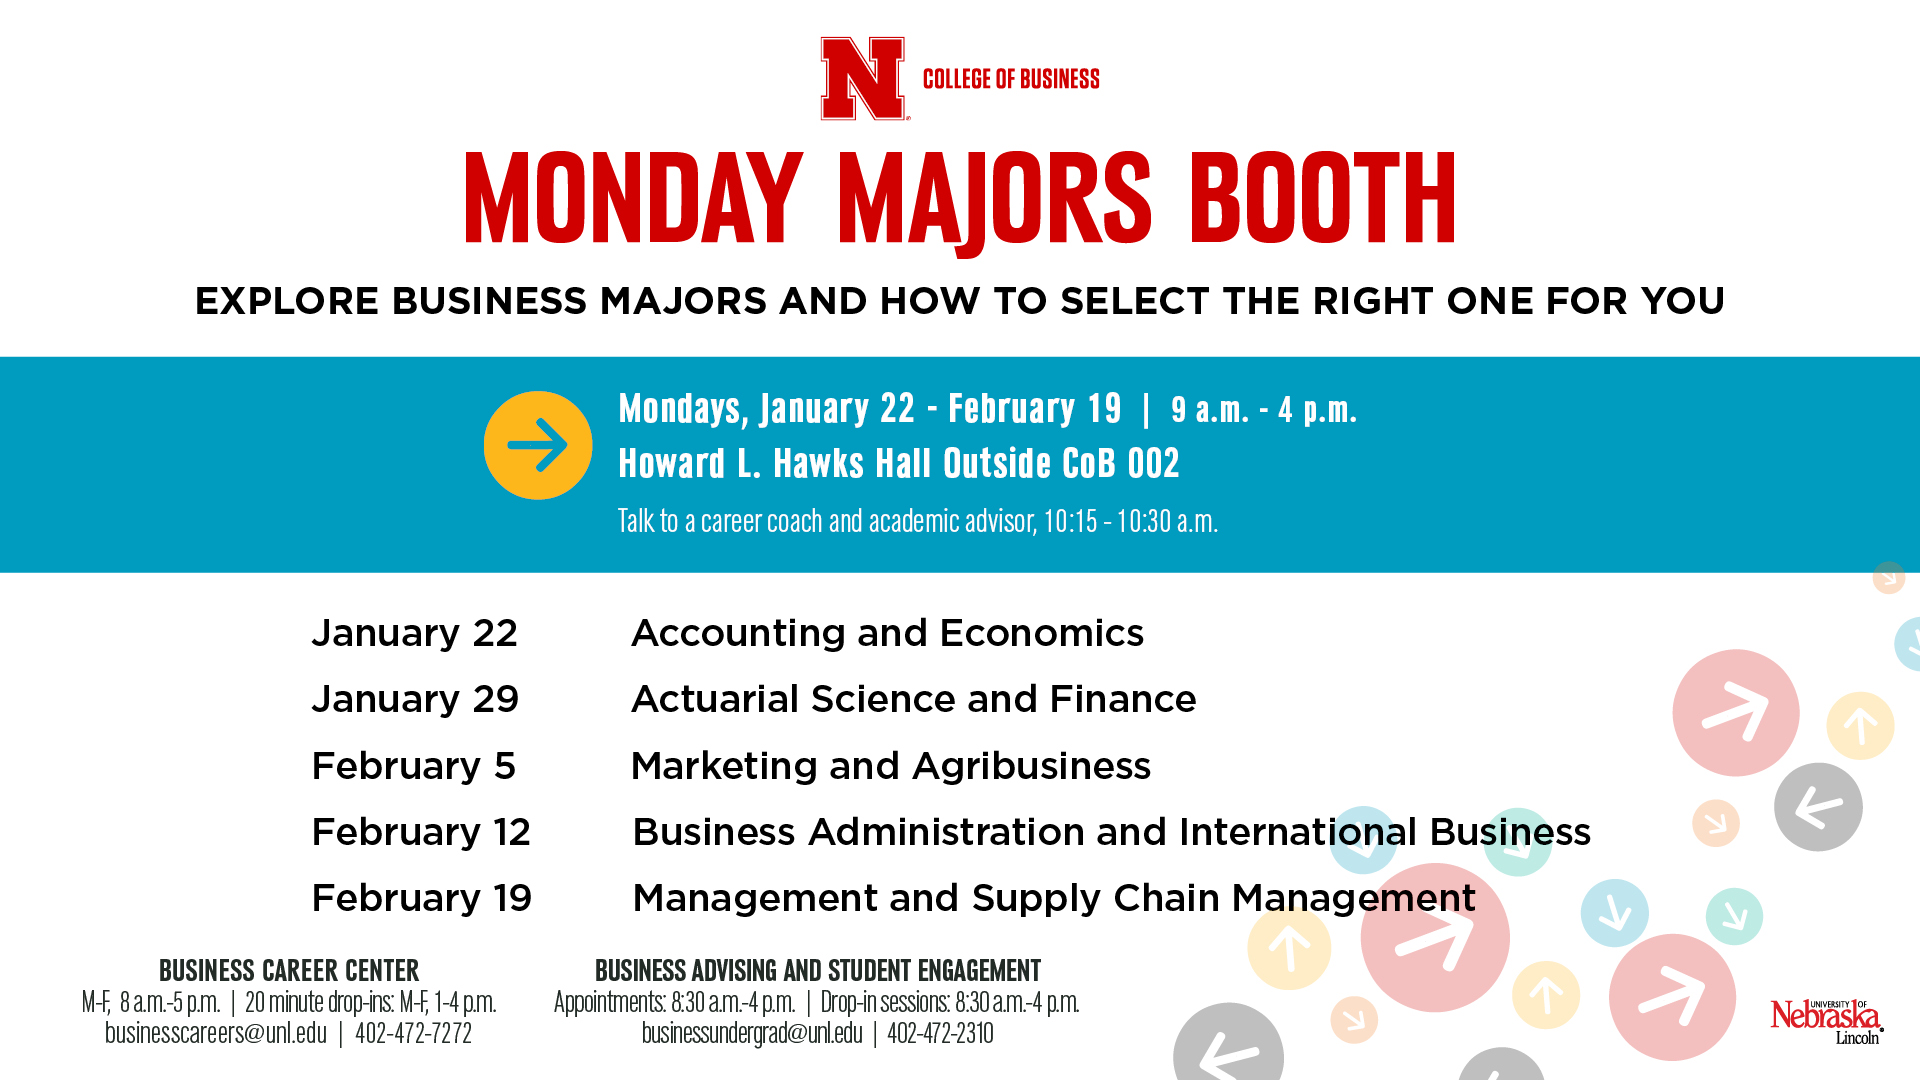 Stop by the Monday Majors booth outside of Hawks Hall CoB 002 starting January 22.